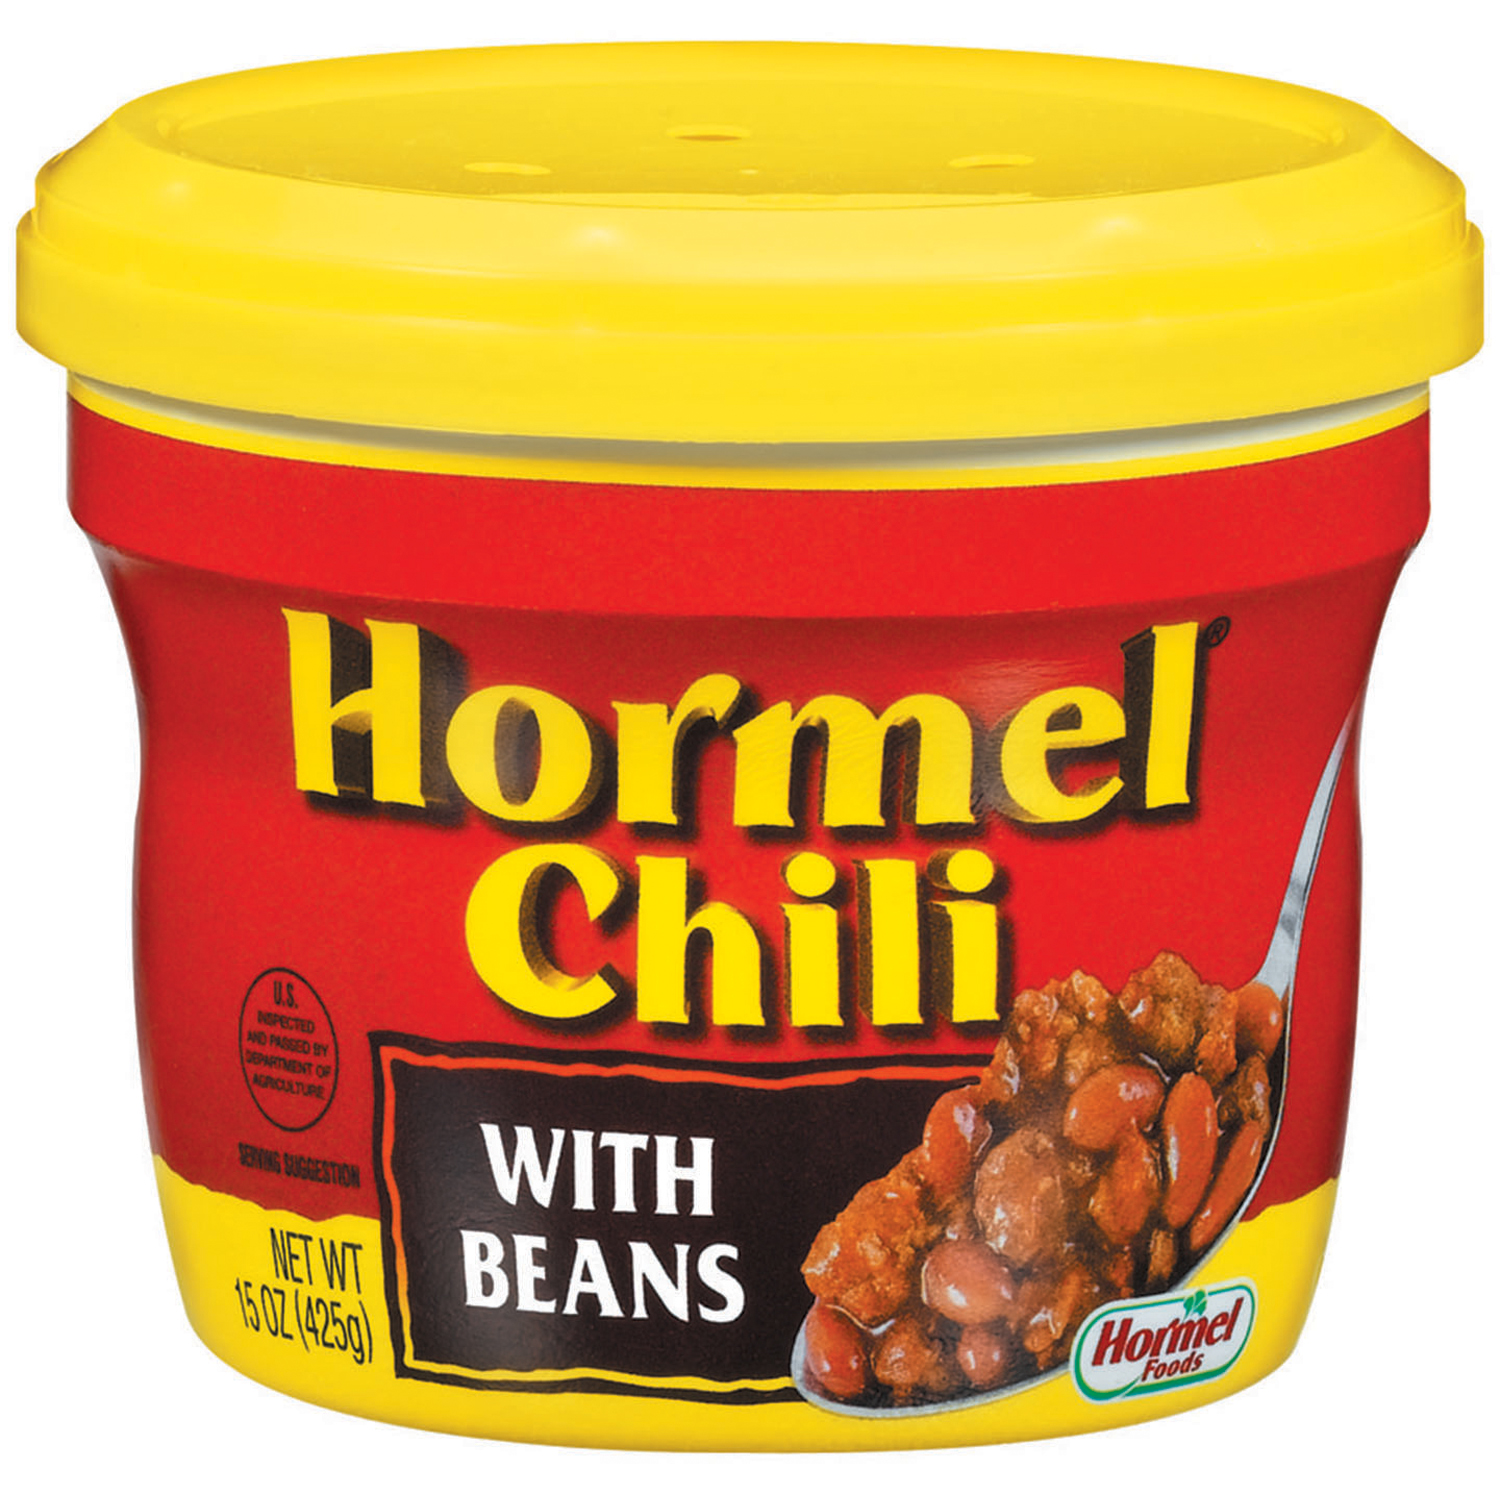 Hormel Chili, with Beans, 15 oz (425 g)